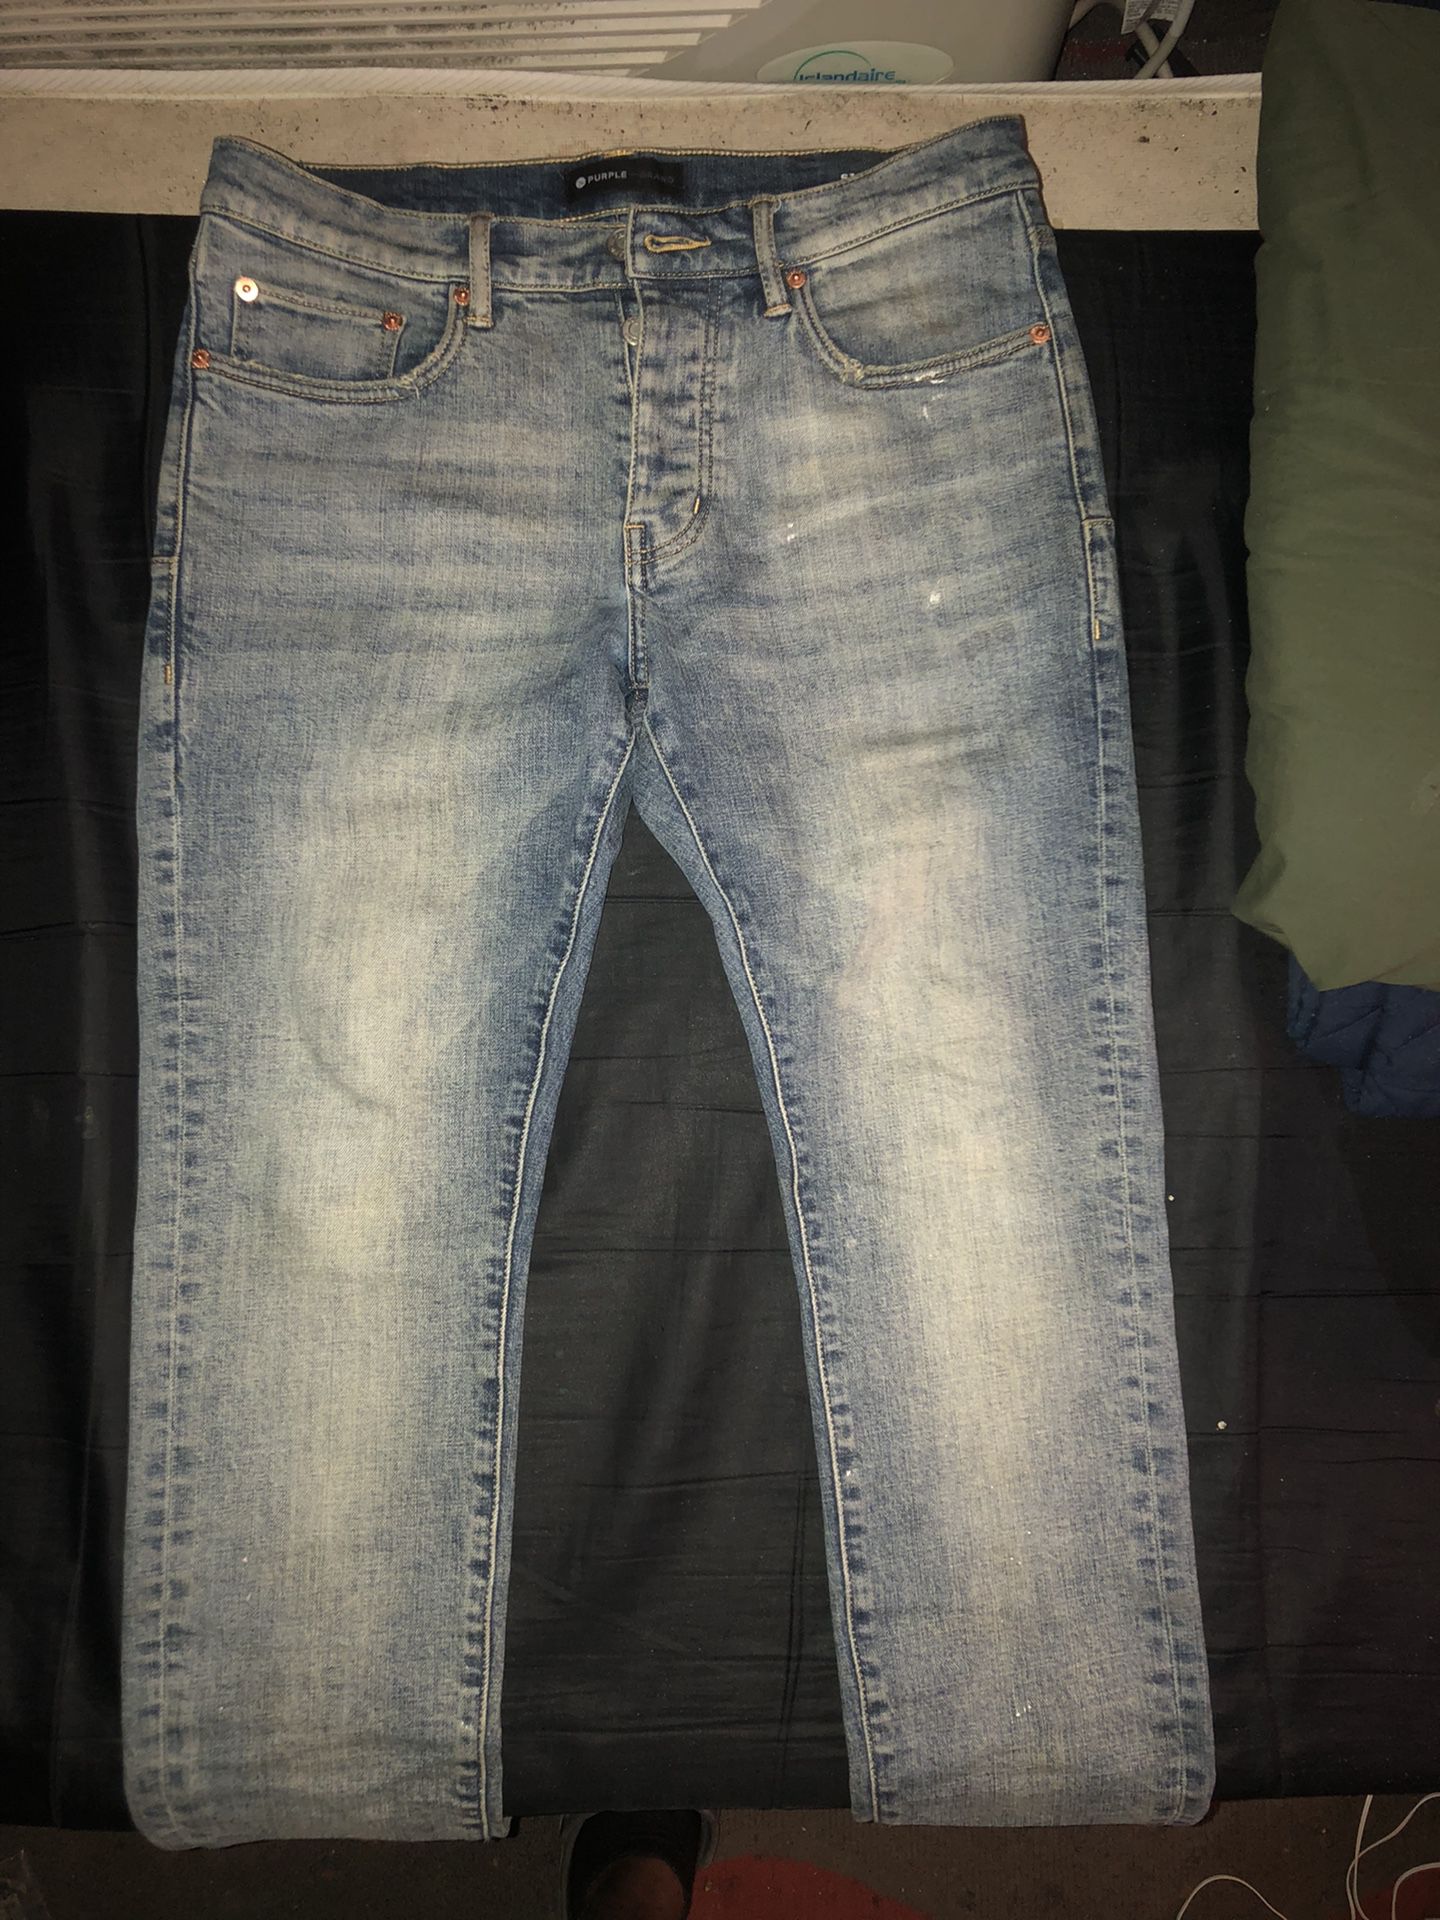 Purple Brand Jeans P001 Low Rise Skinny Monogram Jacquard for Sale in  Freeport, NY - OfferUp